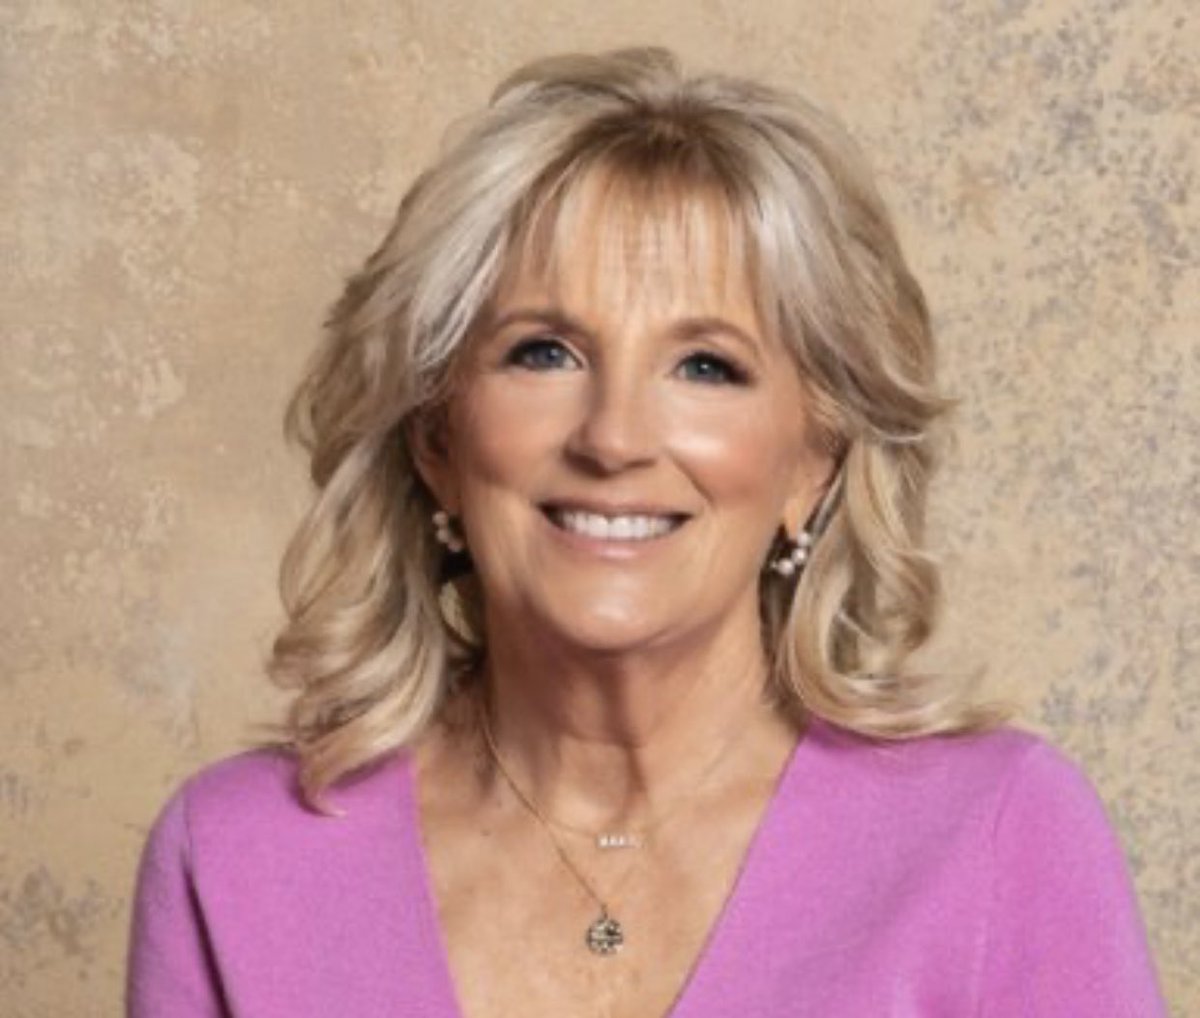 Jill Biden First Lady Modeled in college Earned a doctorate in education Promotes breast cancer awareness Supports military families Made the cover of Vogue Married to Joe for 46 years Role model to women everywhere Drop a ❤️ and Repost if you love Dr. Jill Biden!